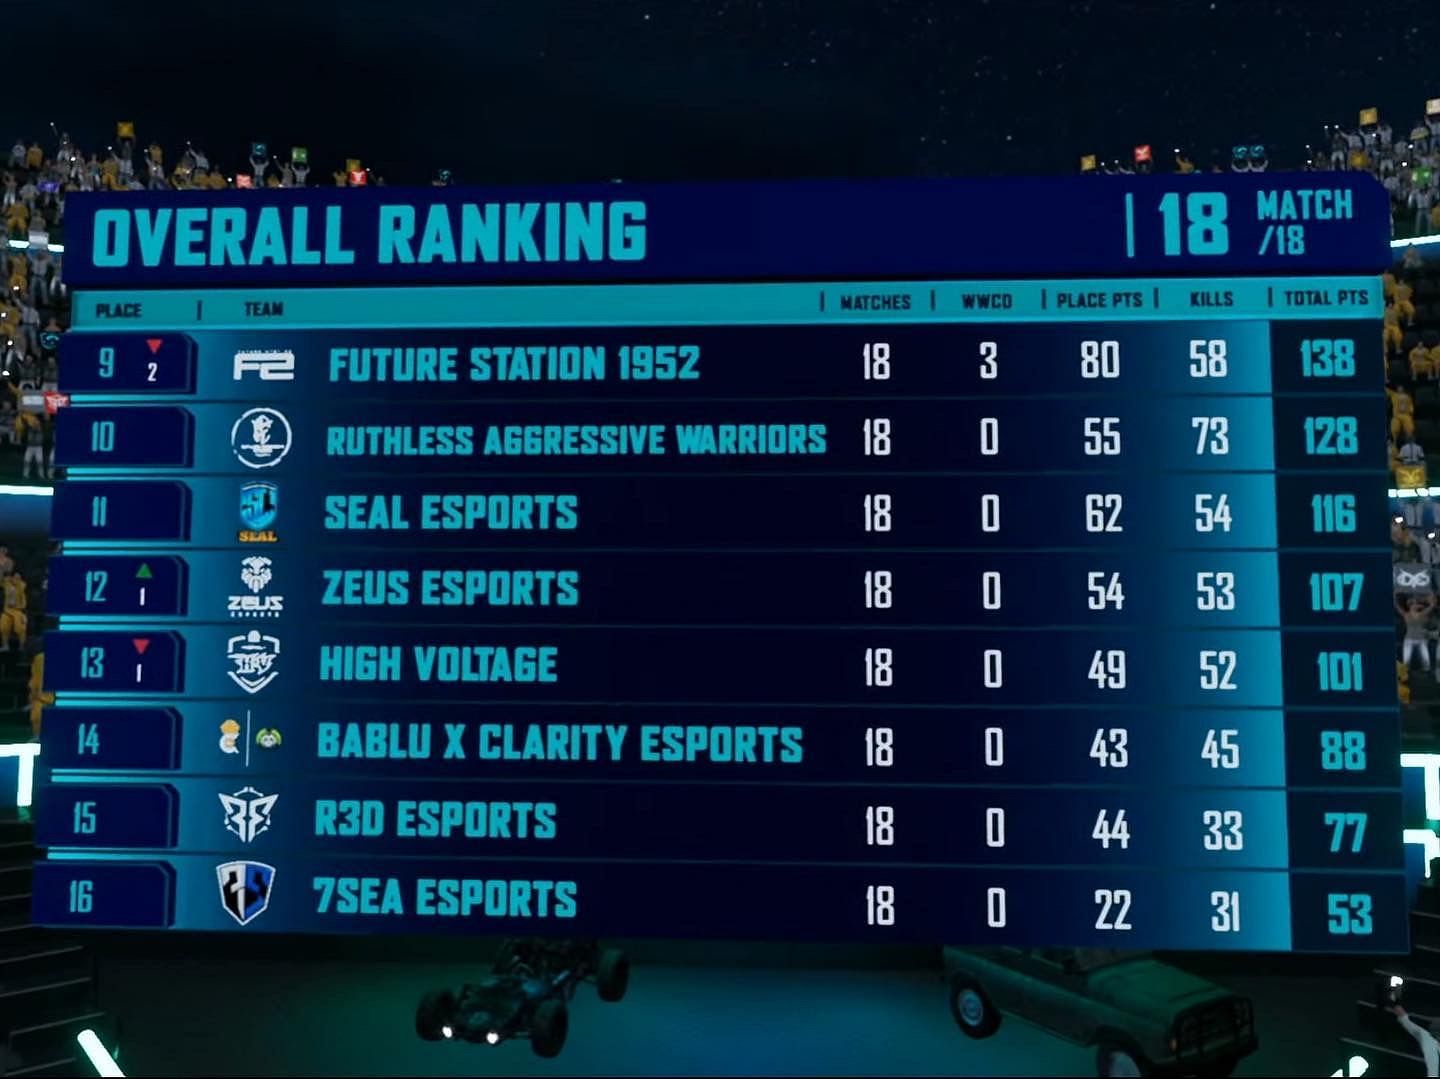 Overall standings of PMPL South Asia S4 Finals